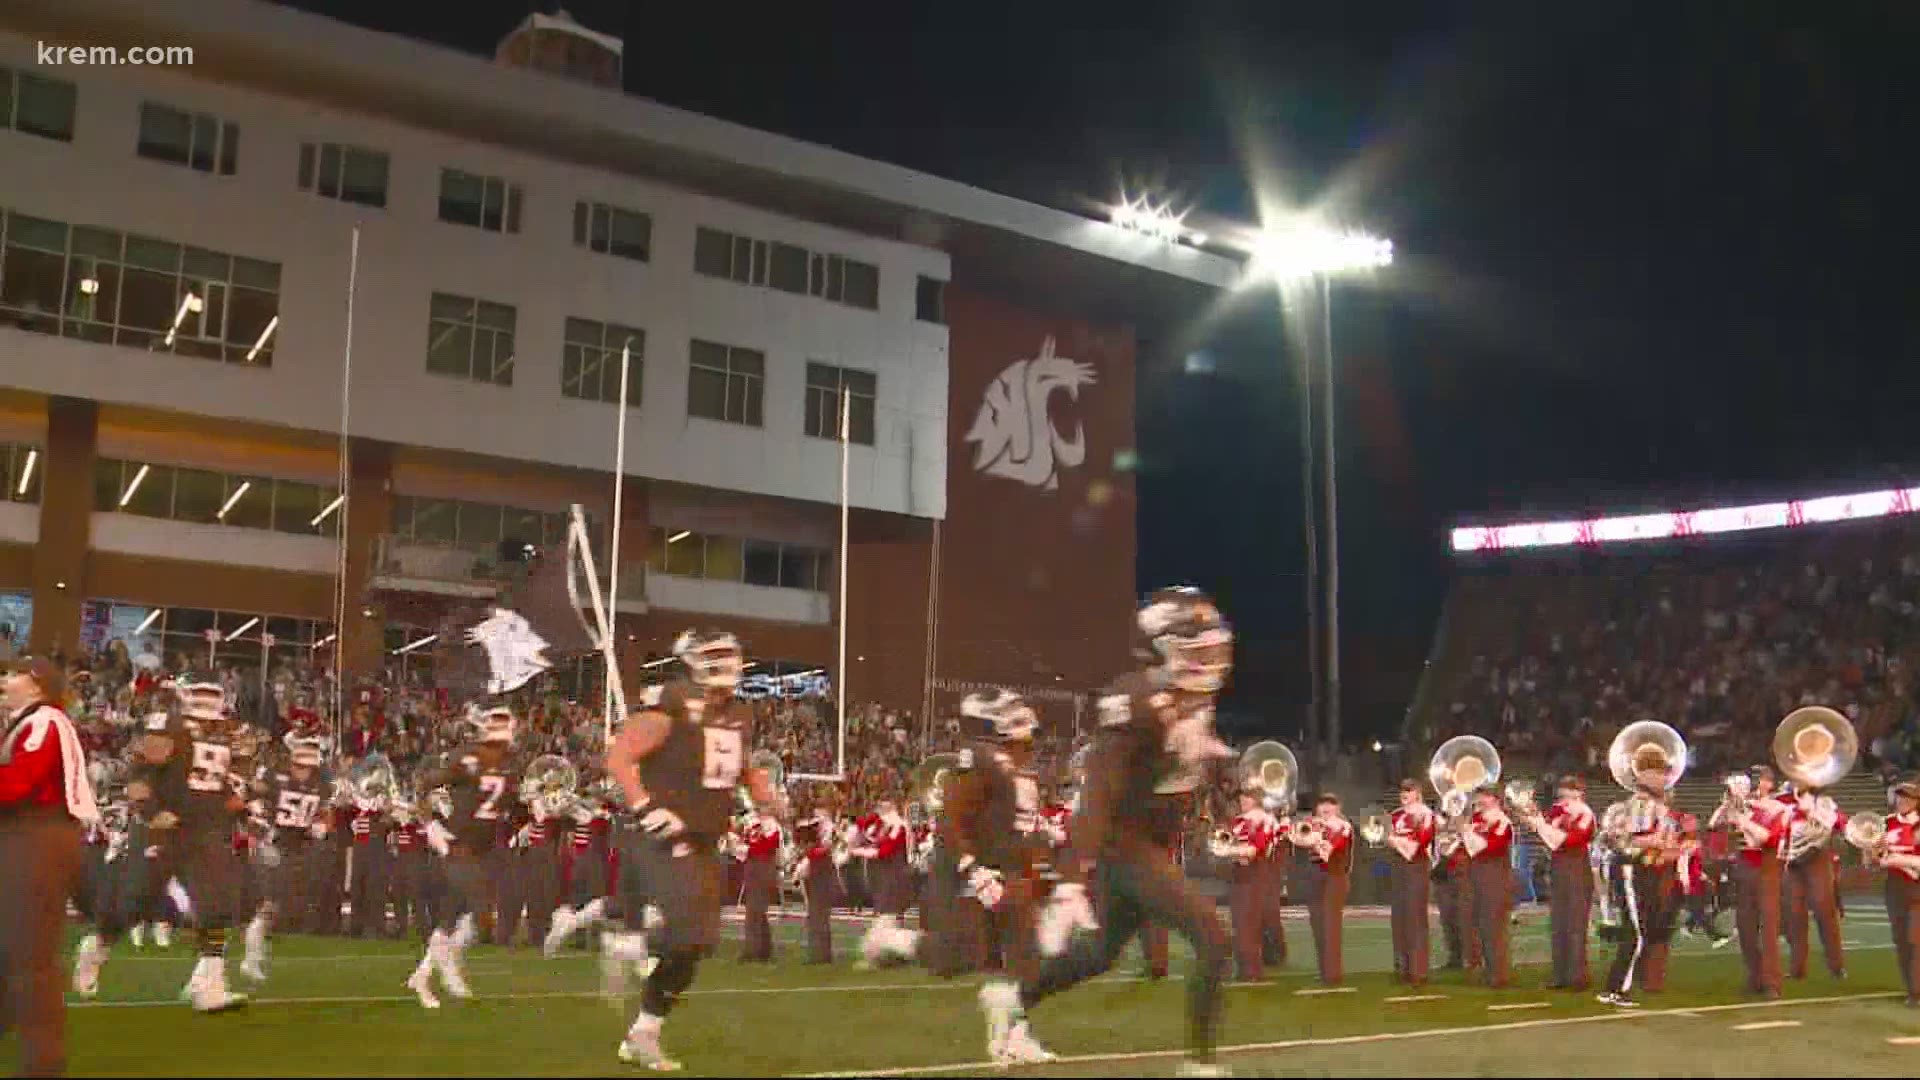 With no fans or band allowed, Martin Stadium will be lacking its normal sound. WSU recreated the sounds for home games to give it a gameday feel.